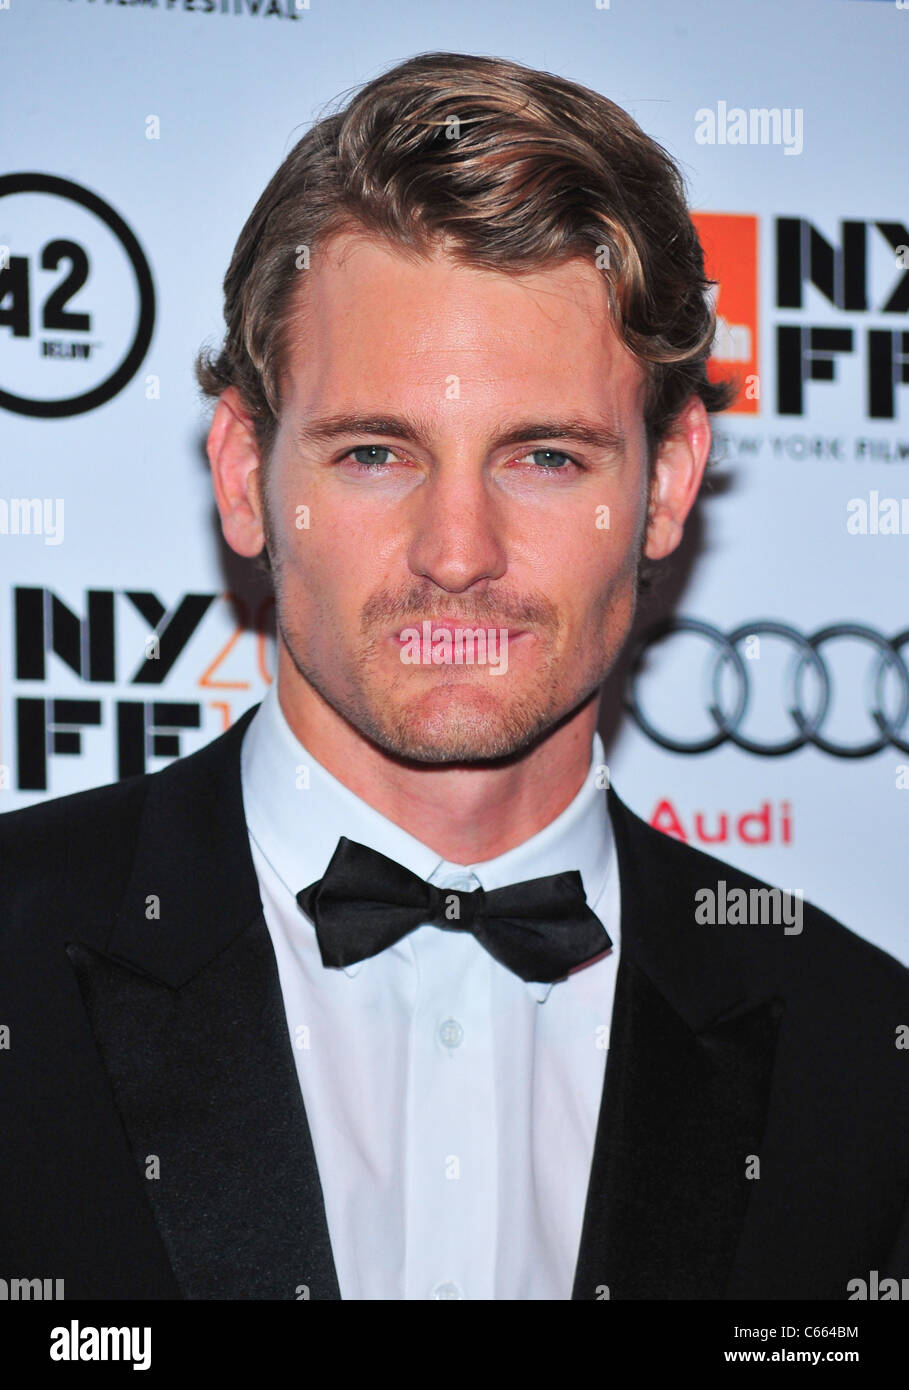 Josh Pence at arrivals for The 48th New York Film Festival Opening Night Premiere of THE SOCIAL NETWORK, Alice Tully Hall at Lincoln Center, New York, NY September 24, 2010. Photo By: Gregorio T. Binuya/Everett Collection Stock Photo